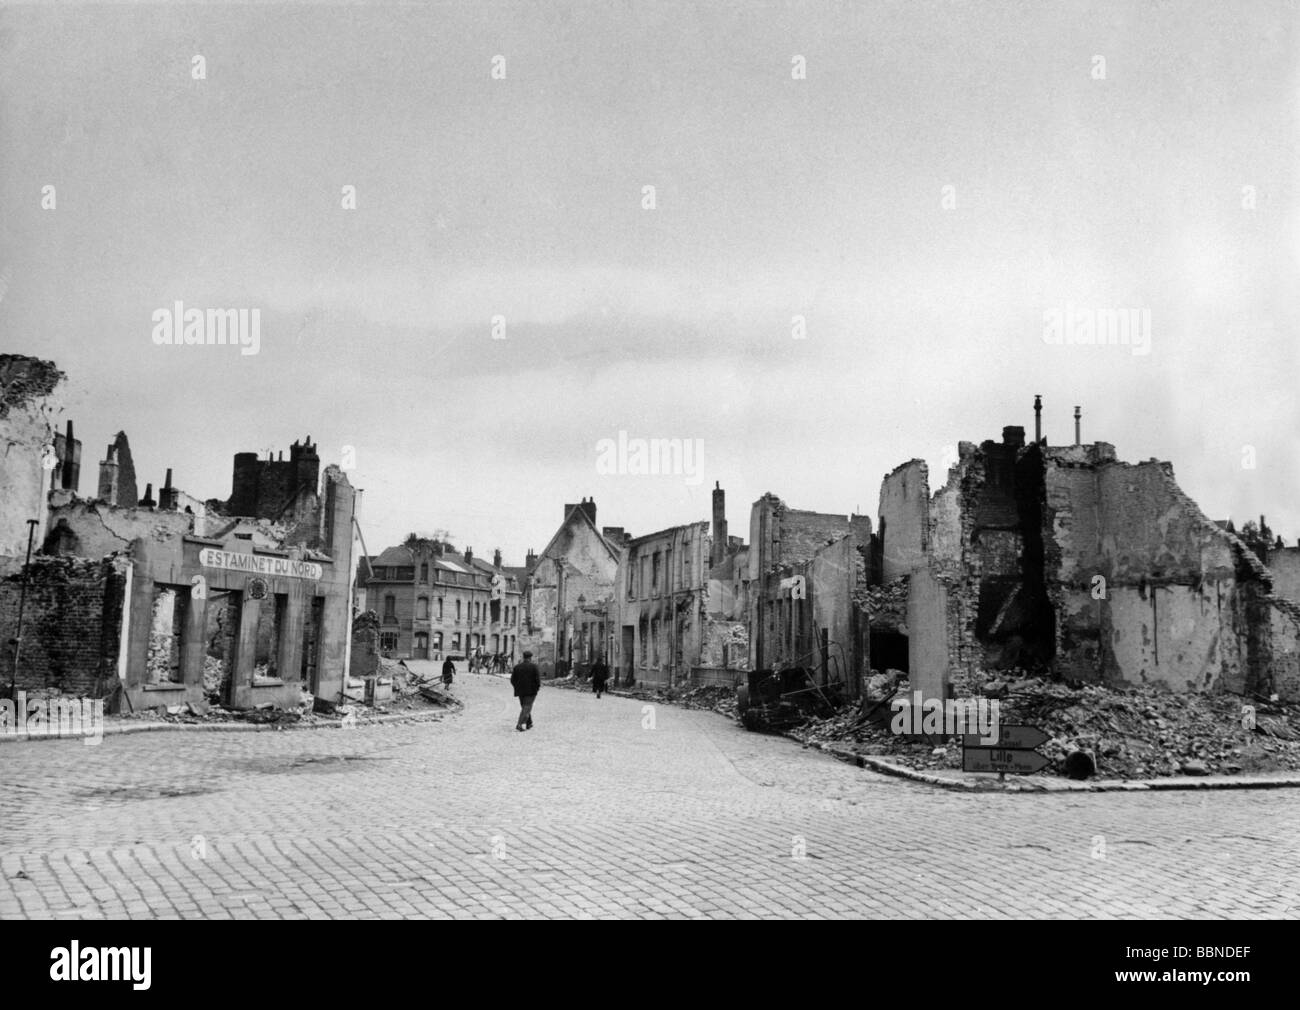 events, Second World War / WWII, France, ruins in Bergues near Dunkirk, June 1940, Stock Photo